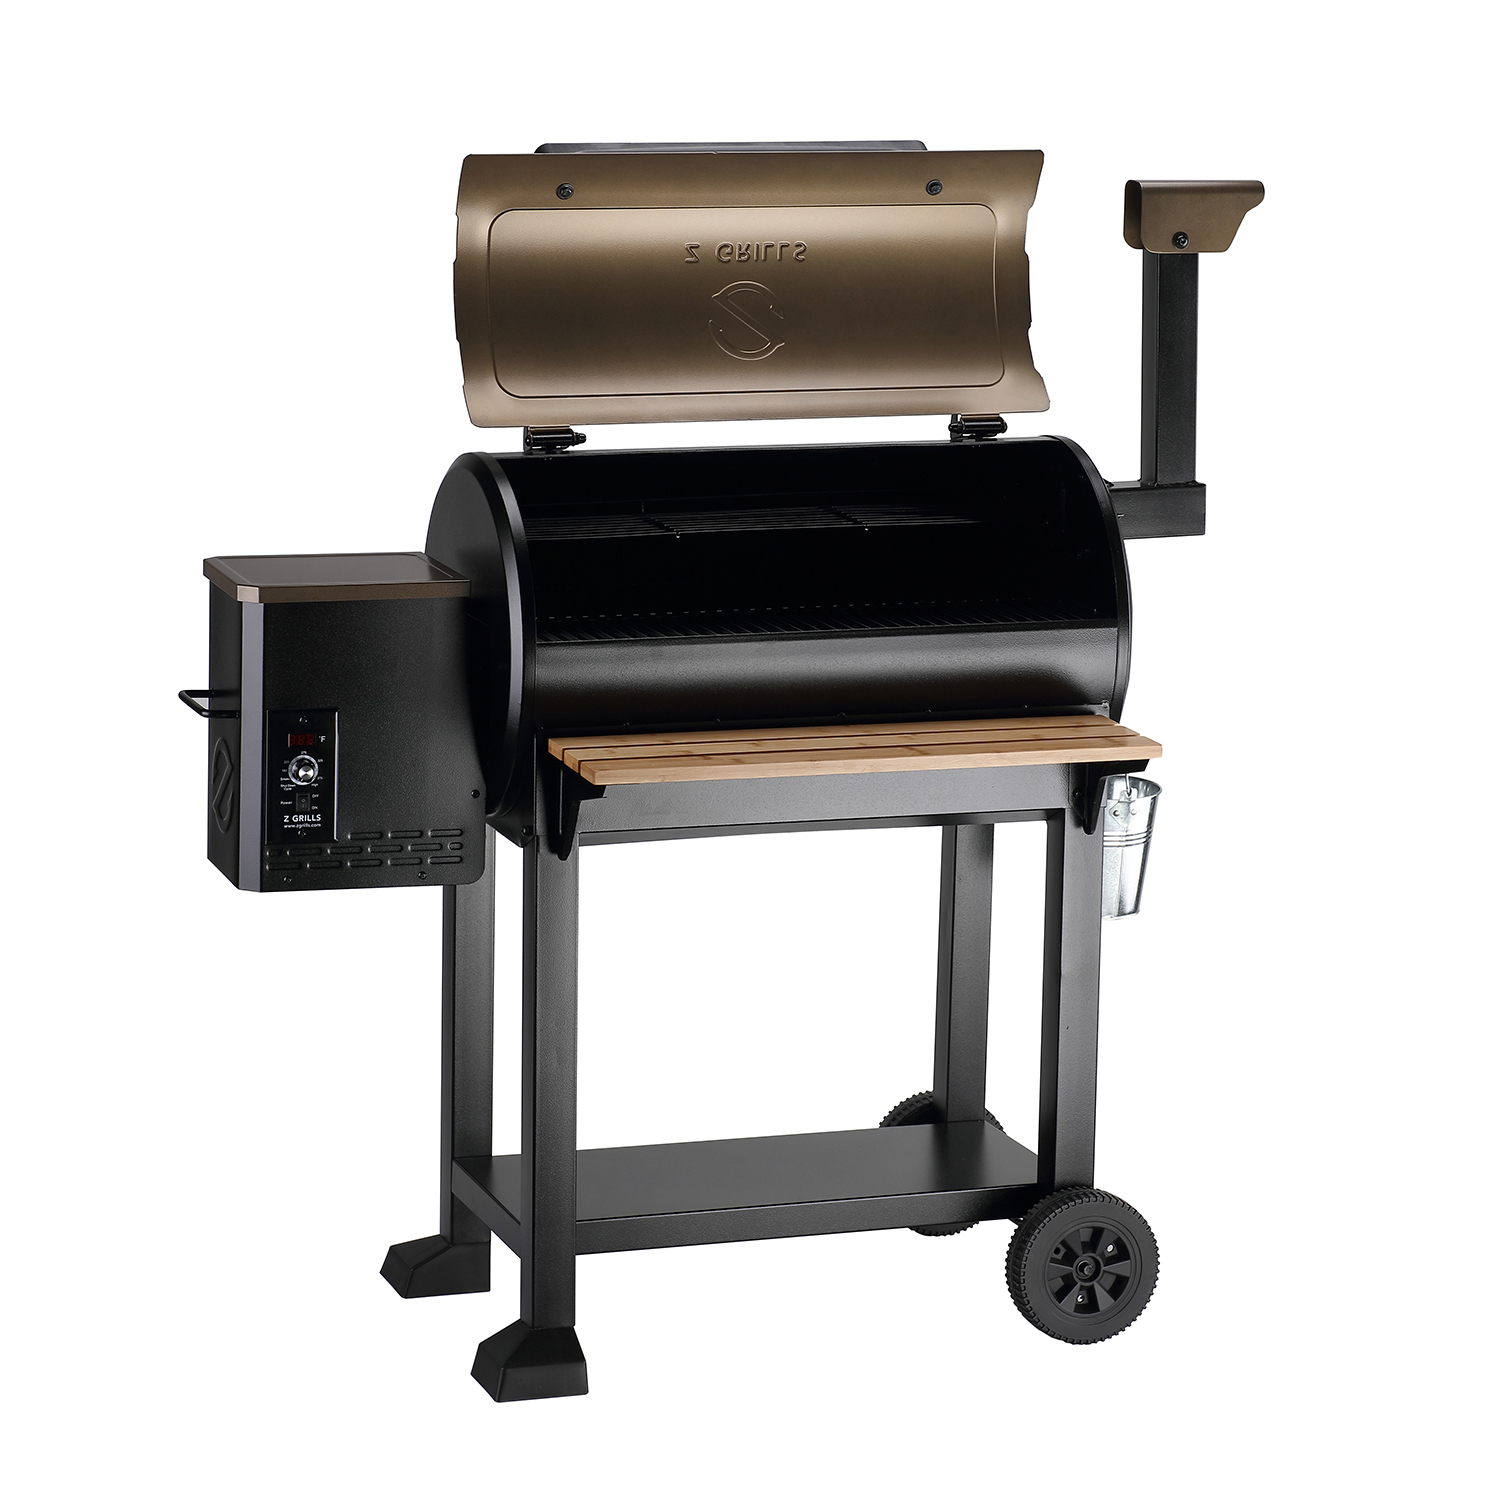 Z GRILLS Wood Pellet Grill and Electric Smoker w/ Auto Temperature Control - image 4 of 6